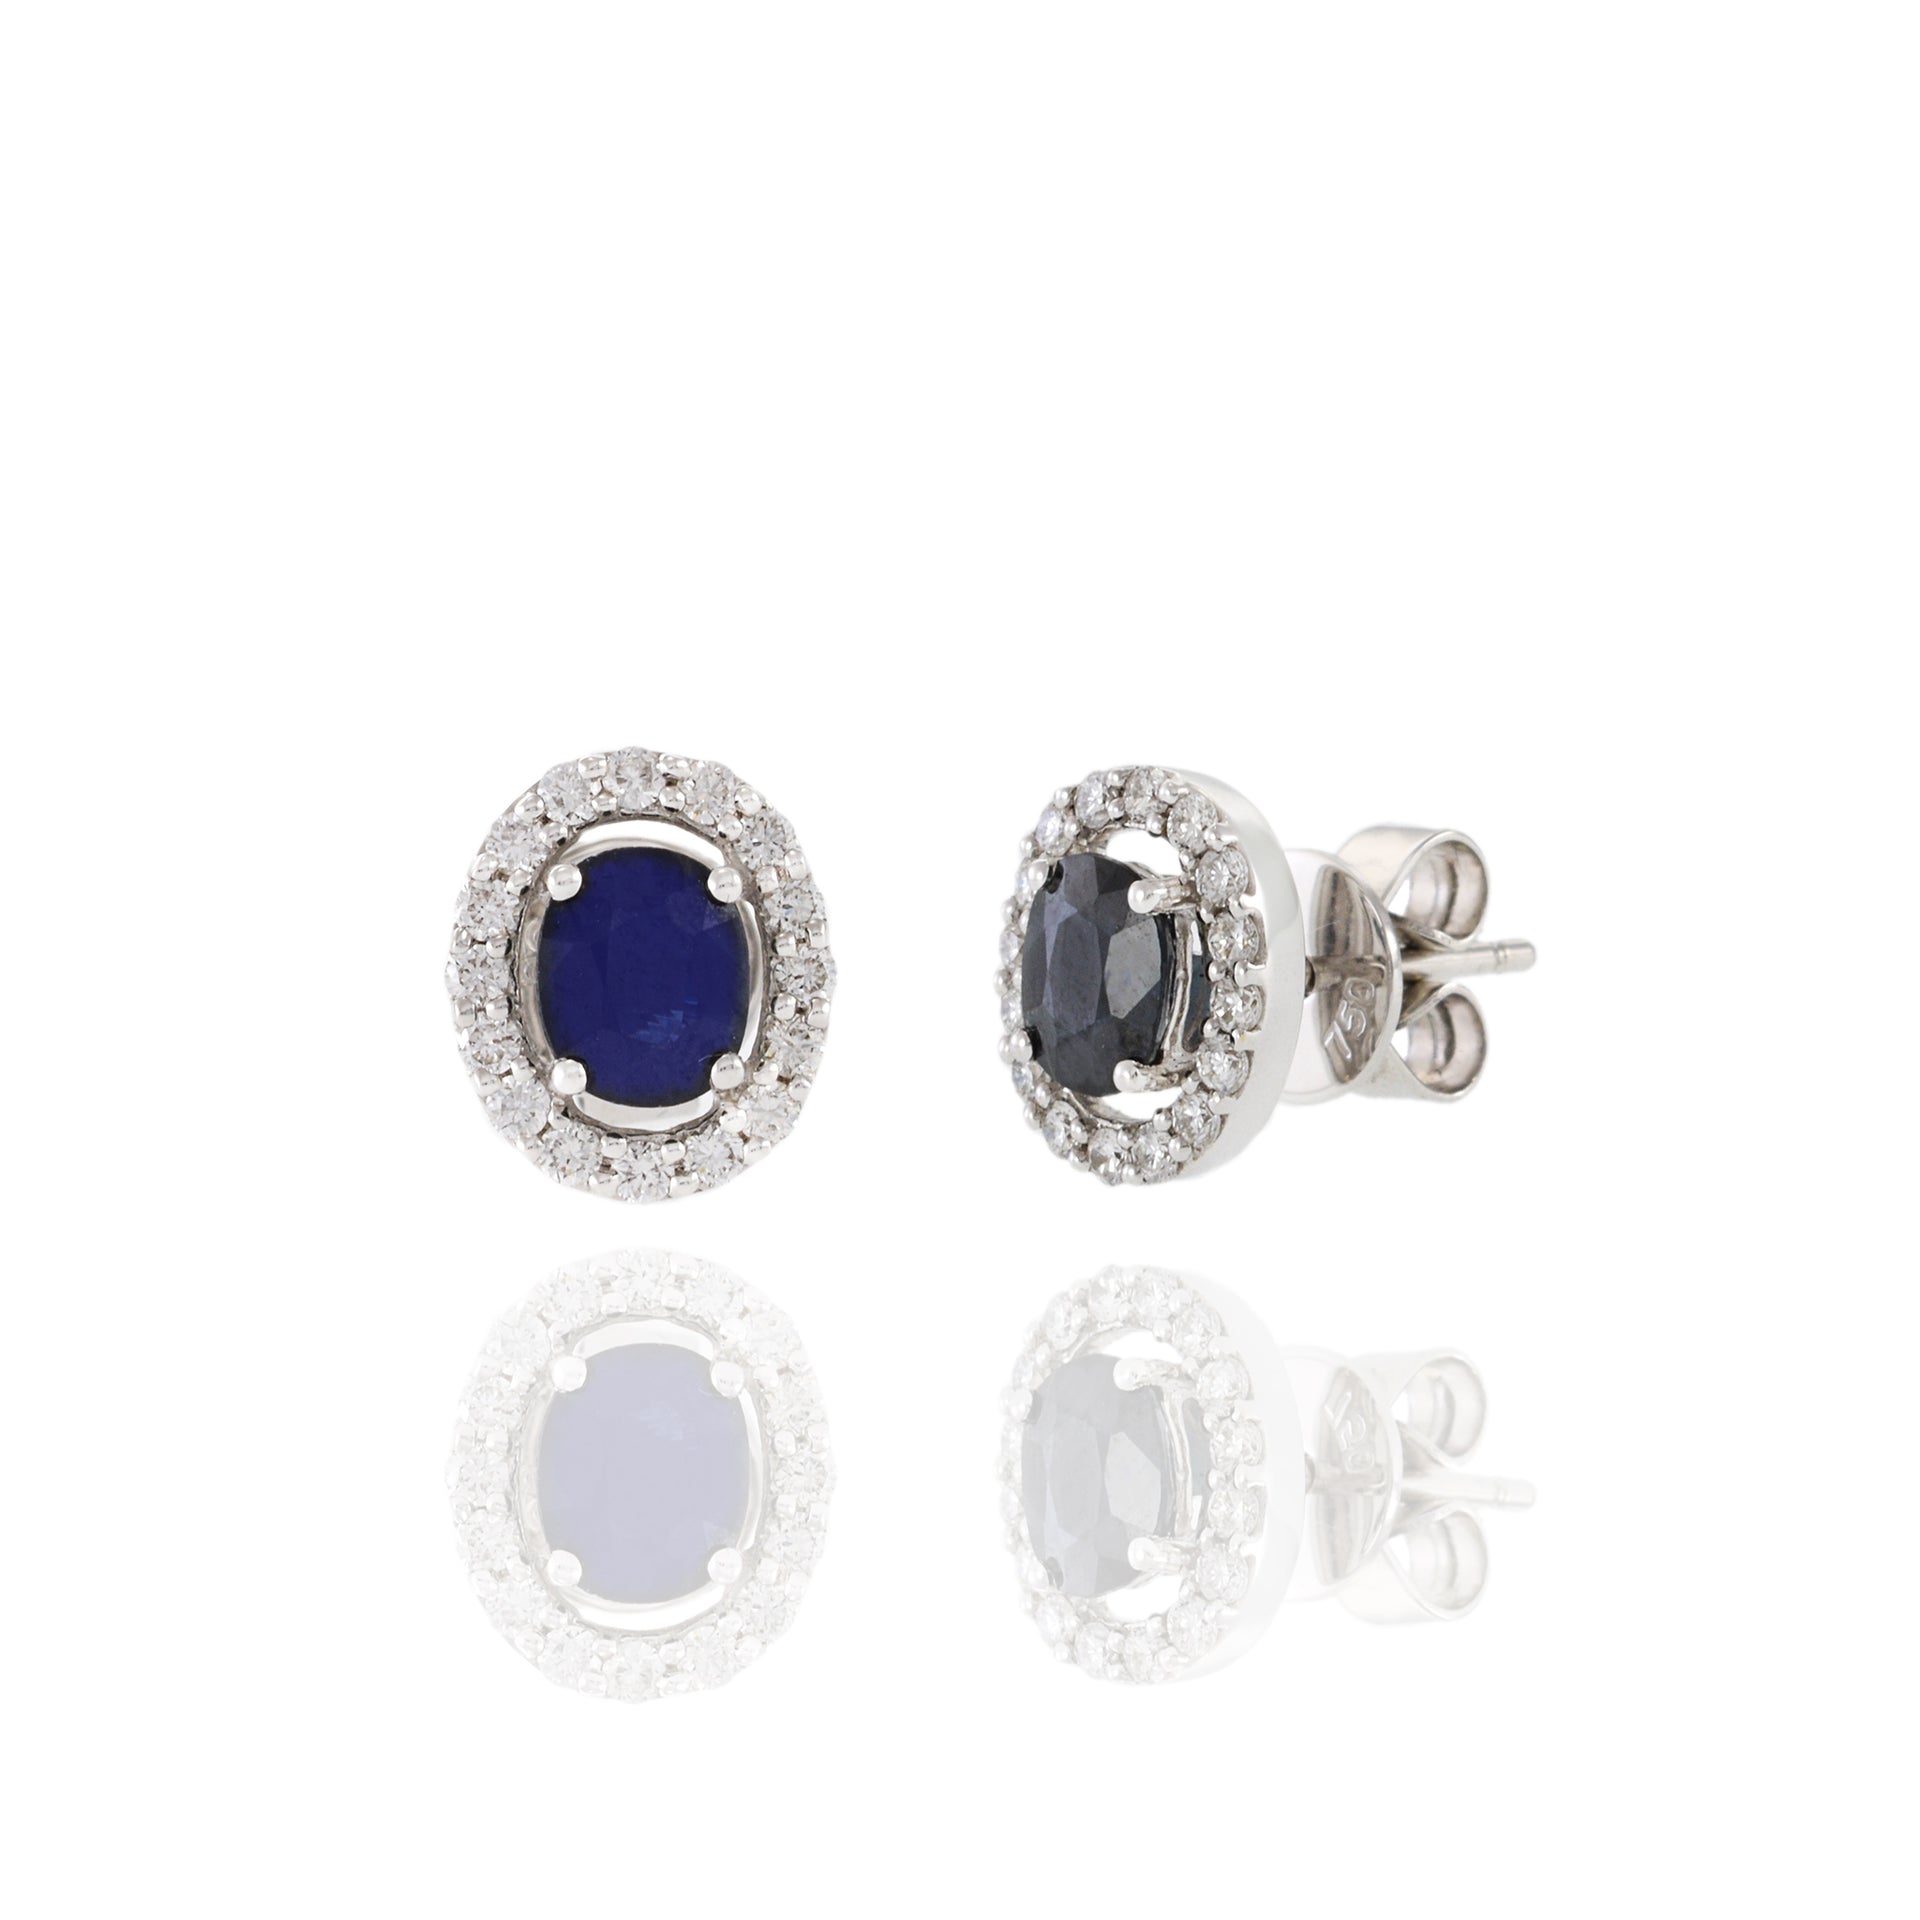 18KT White Gold Sapphire And Diamond Earrings